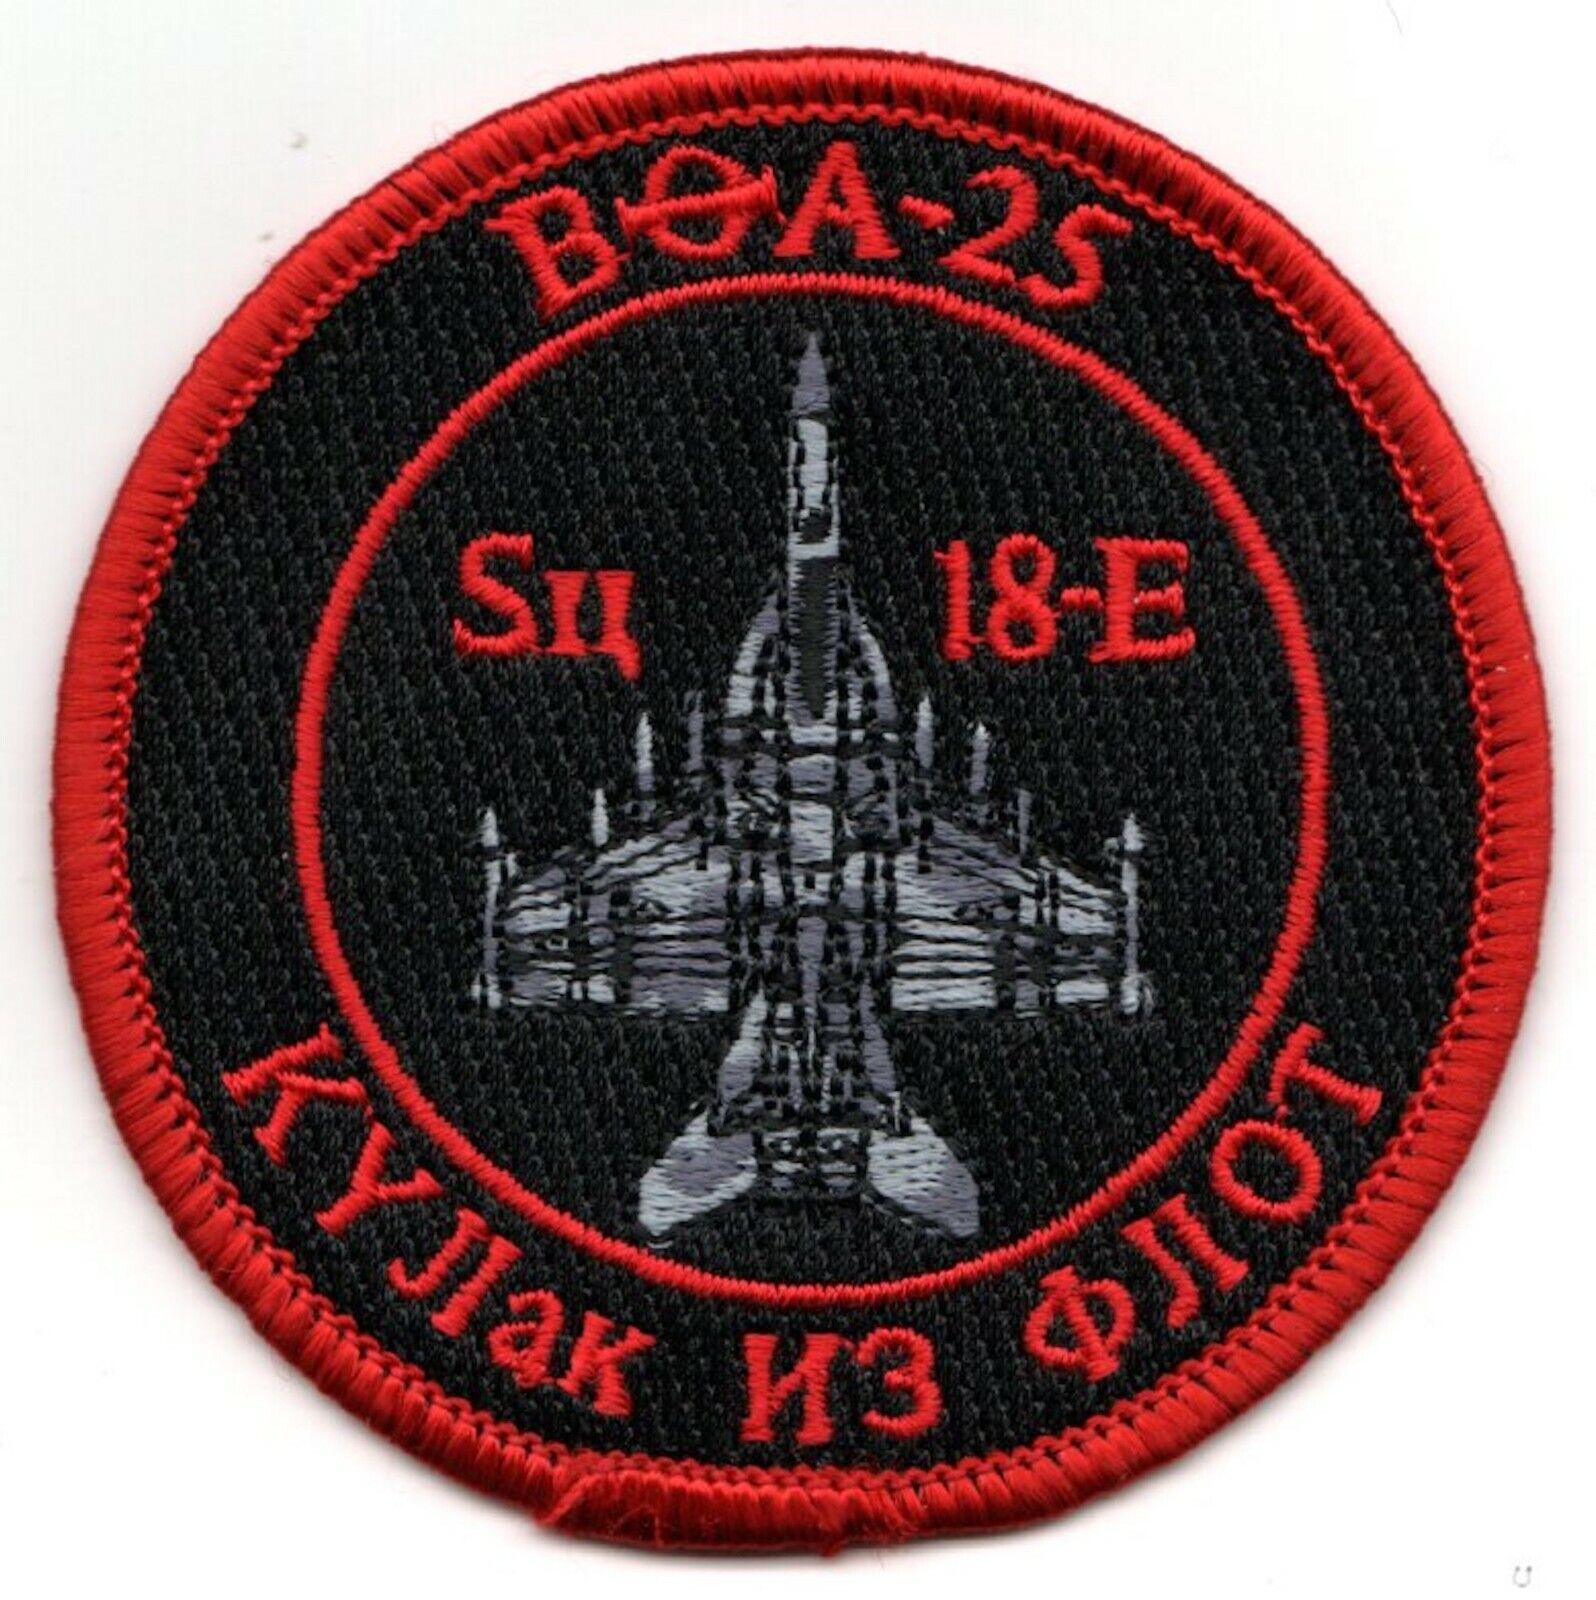 NAVY VFA-25 RED AIR BULLET RUSSIAN BULLET SHOULDER EMBROIDERED JACKET PATCH